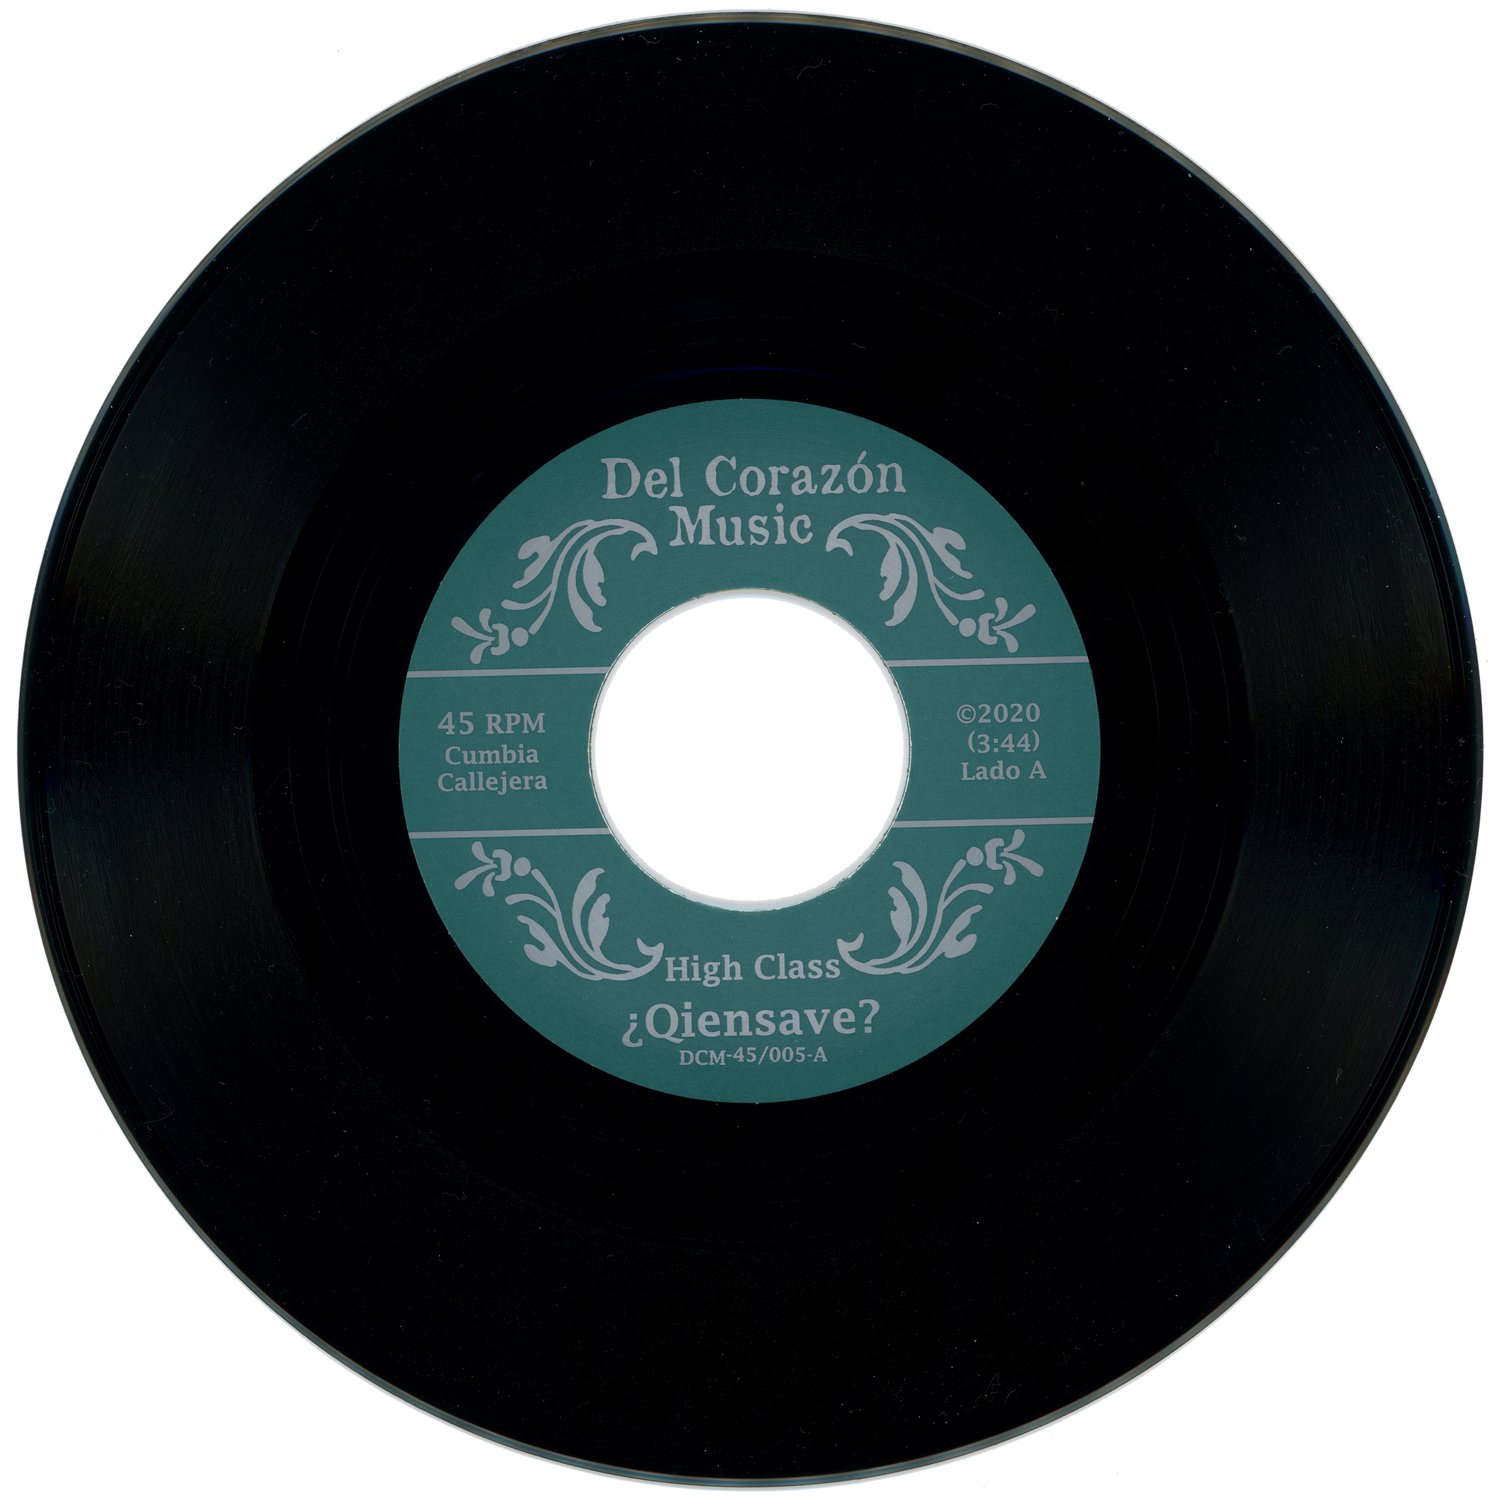 Image of ¿Qiensave? (45rpm) - "High Class / 512-1433" **w/download card & jukebox strip